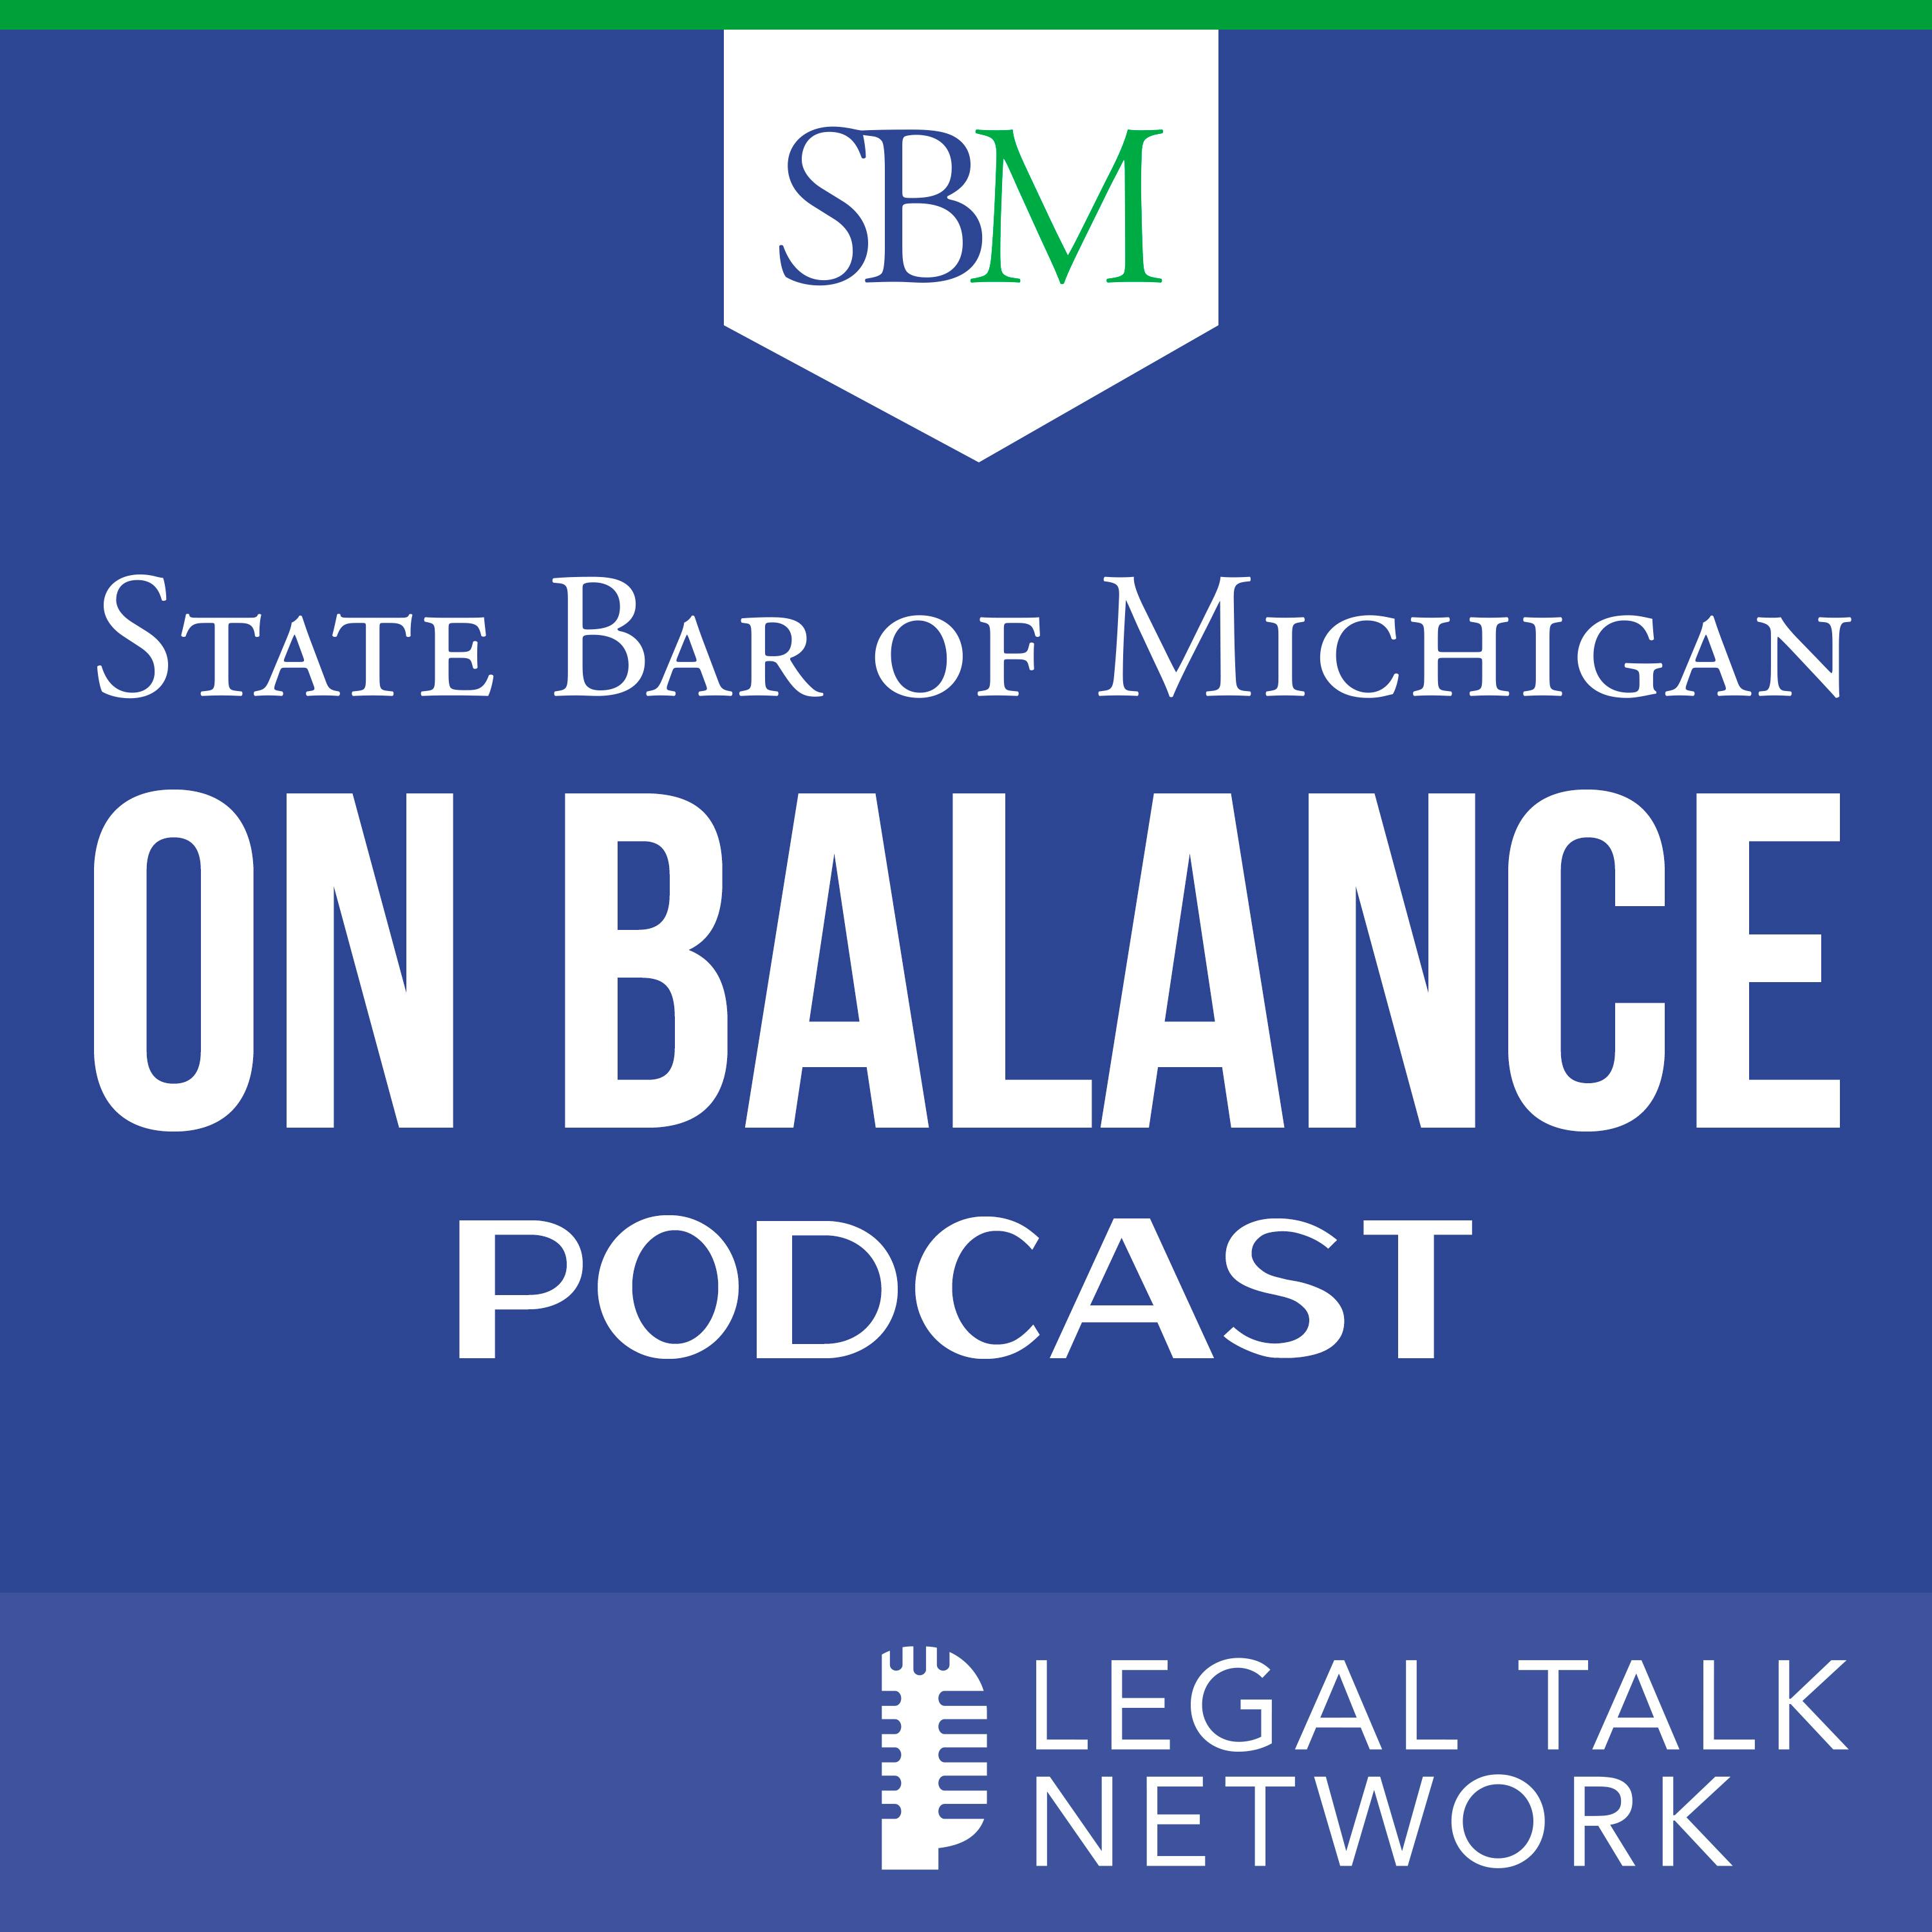 The Attorney Grievance Process in Michigan – Part 1